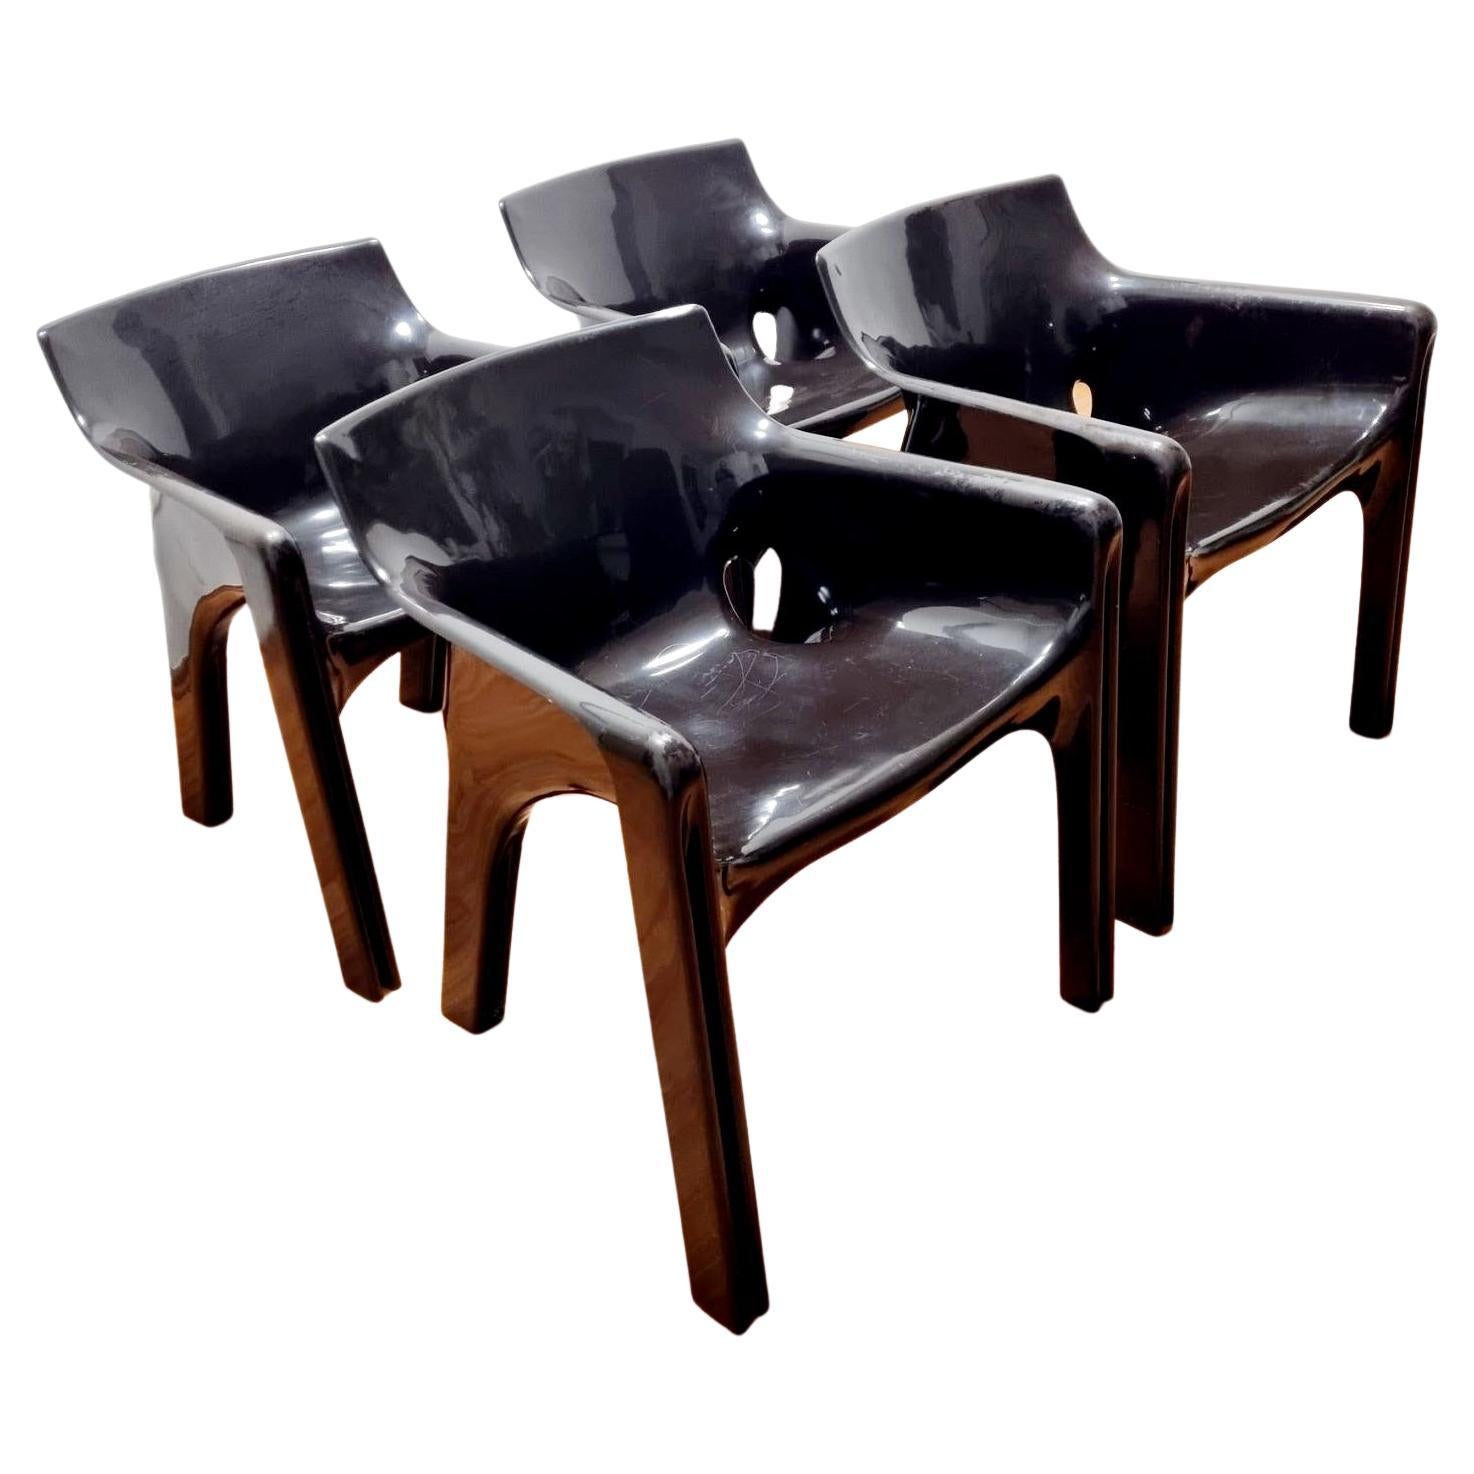 Set of 4 Italian Gaudi Chairs by Vico Magistretti for Artemide, Italy 70s